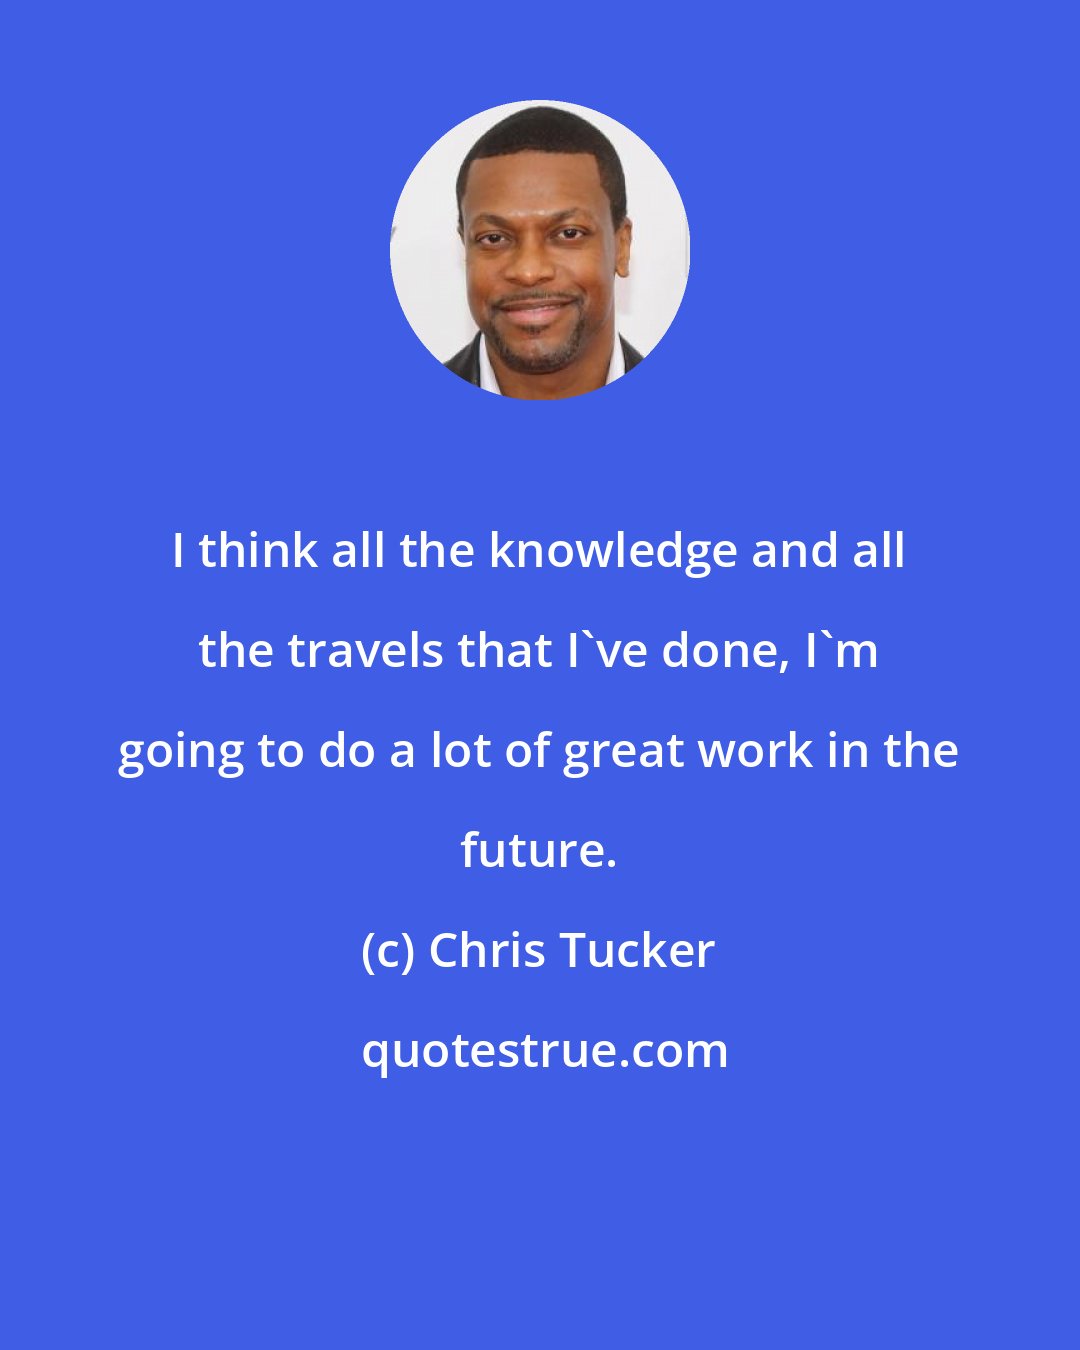 Chris Tucker: I think all the knowledge and all the travels that I've done, I'm going to do a lot of great work in the future.